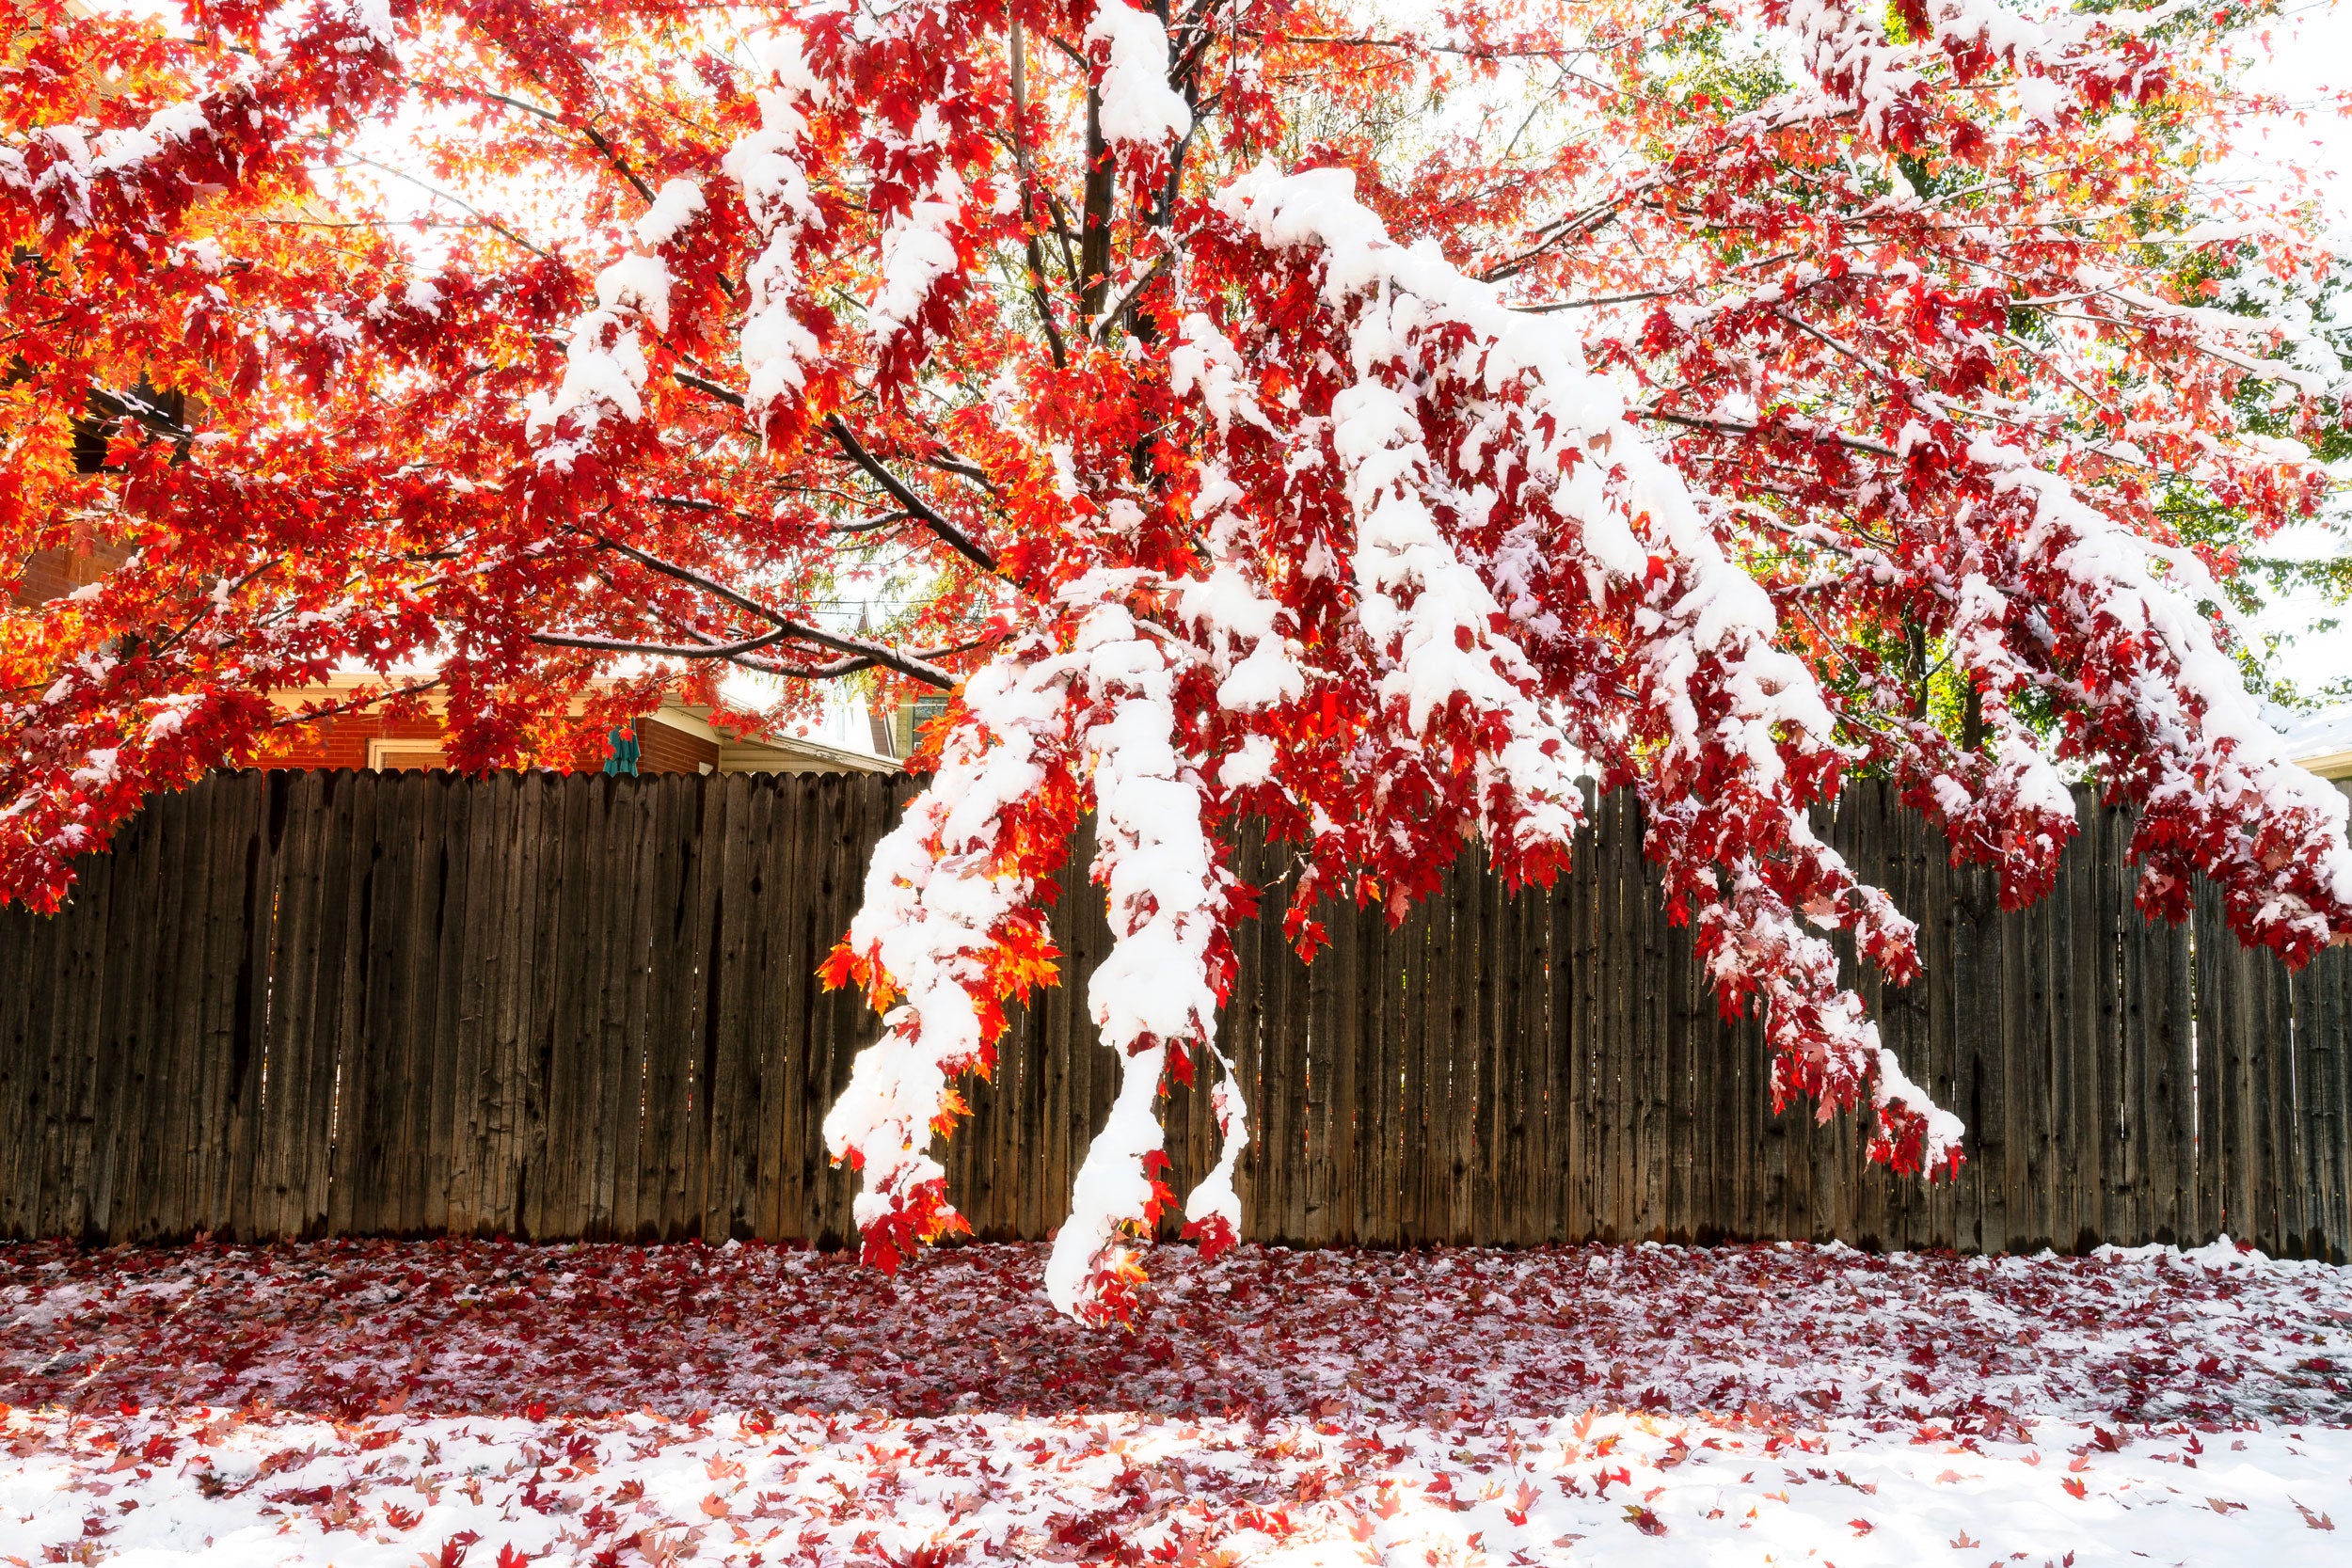 A Lars Gesing fine art nature photograph of a snowy tree in the Highlands neighborhood of Denver, Colorado, an artwork celebrating the legacy of the great Mr. Rogers.